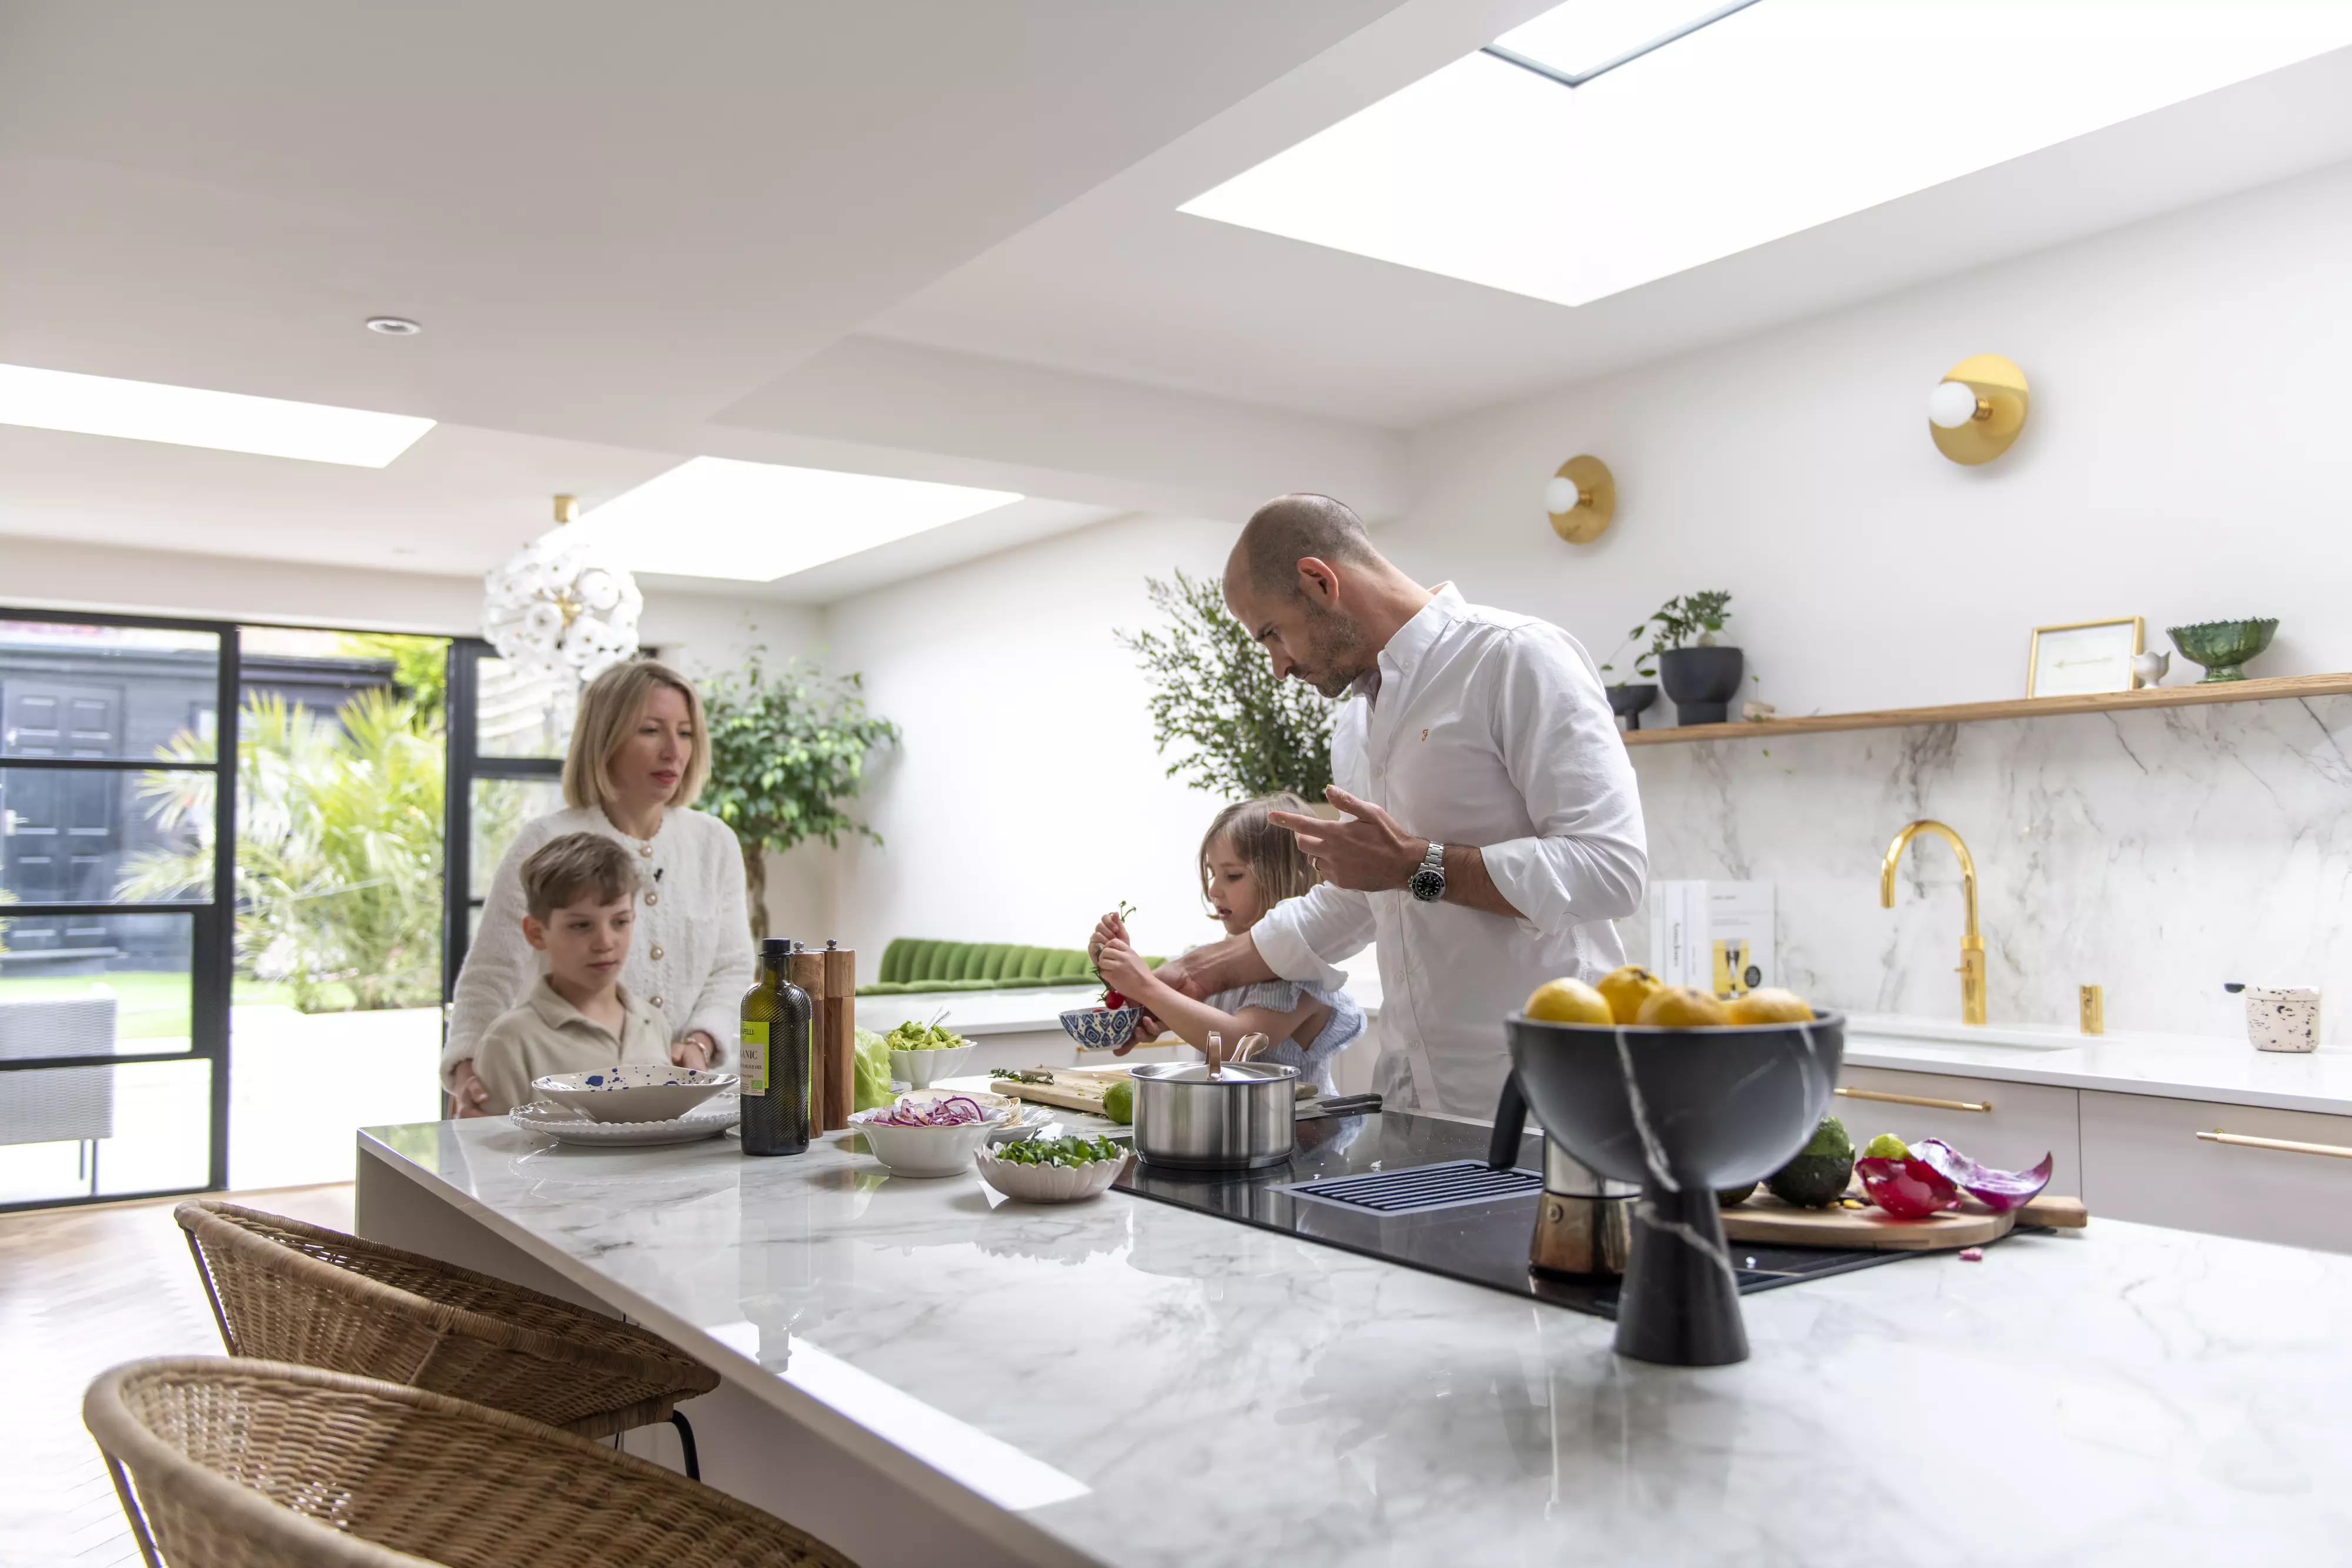 Modern kitchen with family cooking, natural light from VELUX roof window.